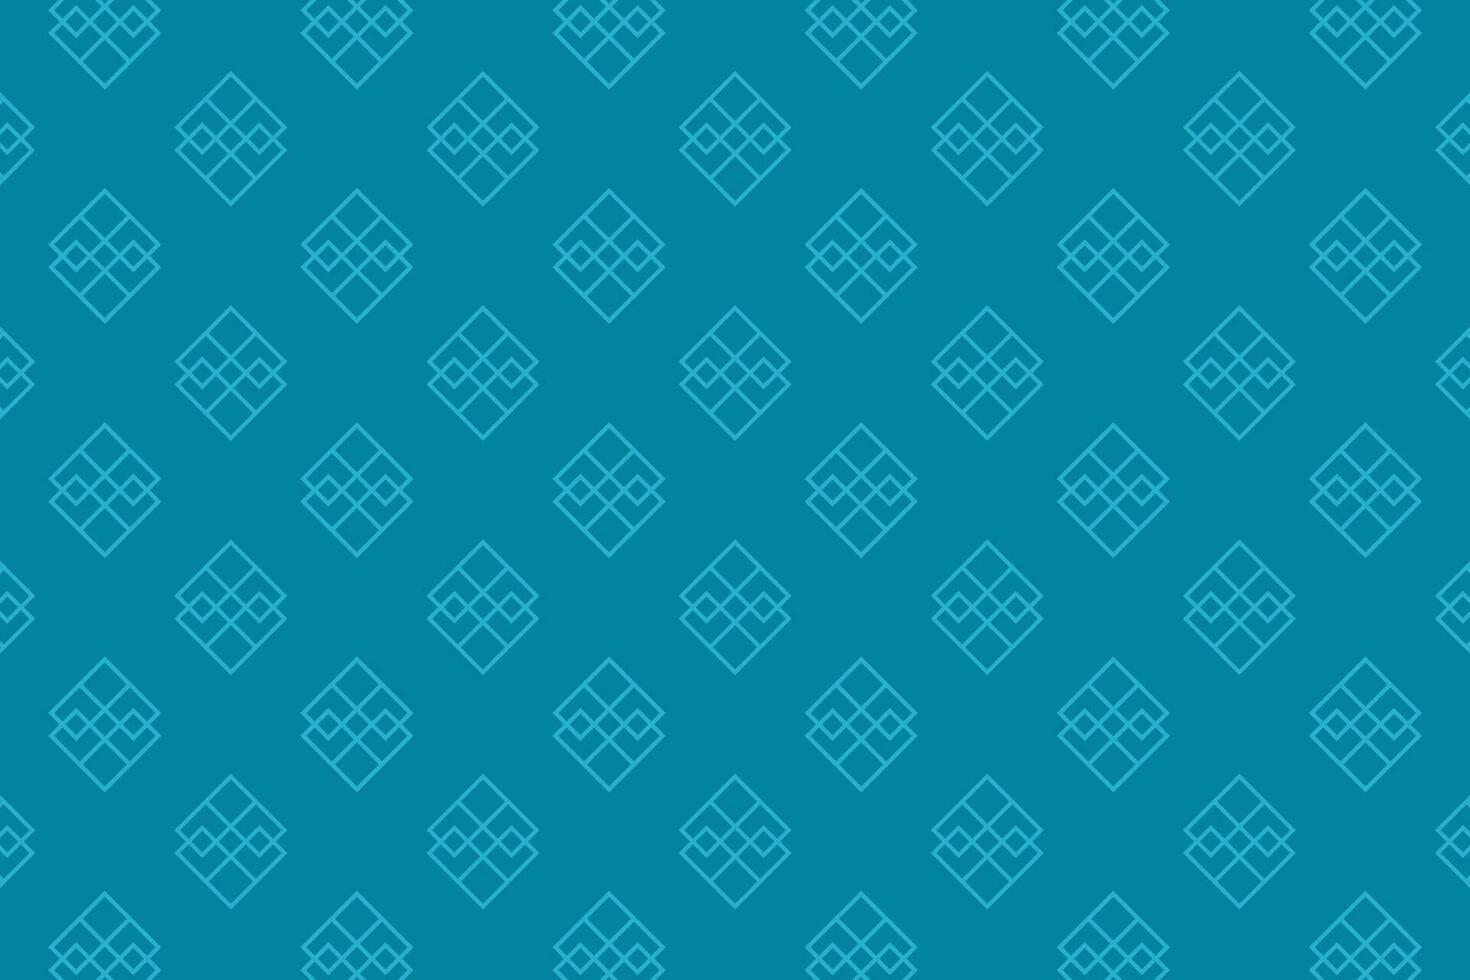 Luxury seamless pattern in tosca colors. Elegant background vector illustration.